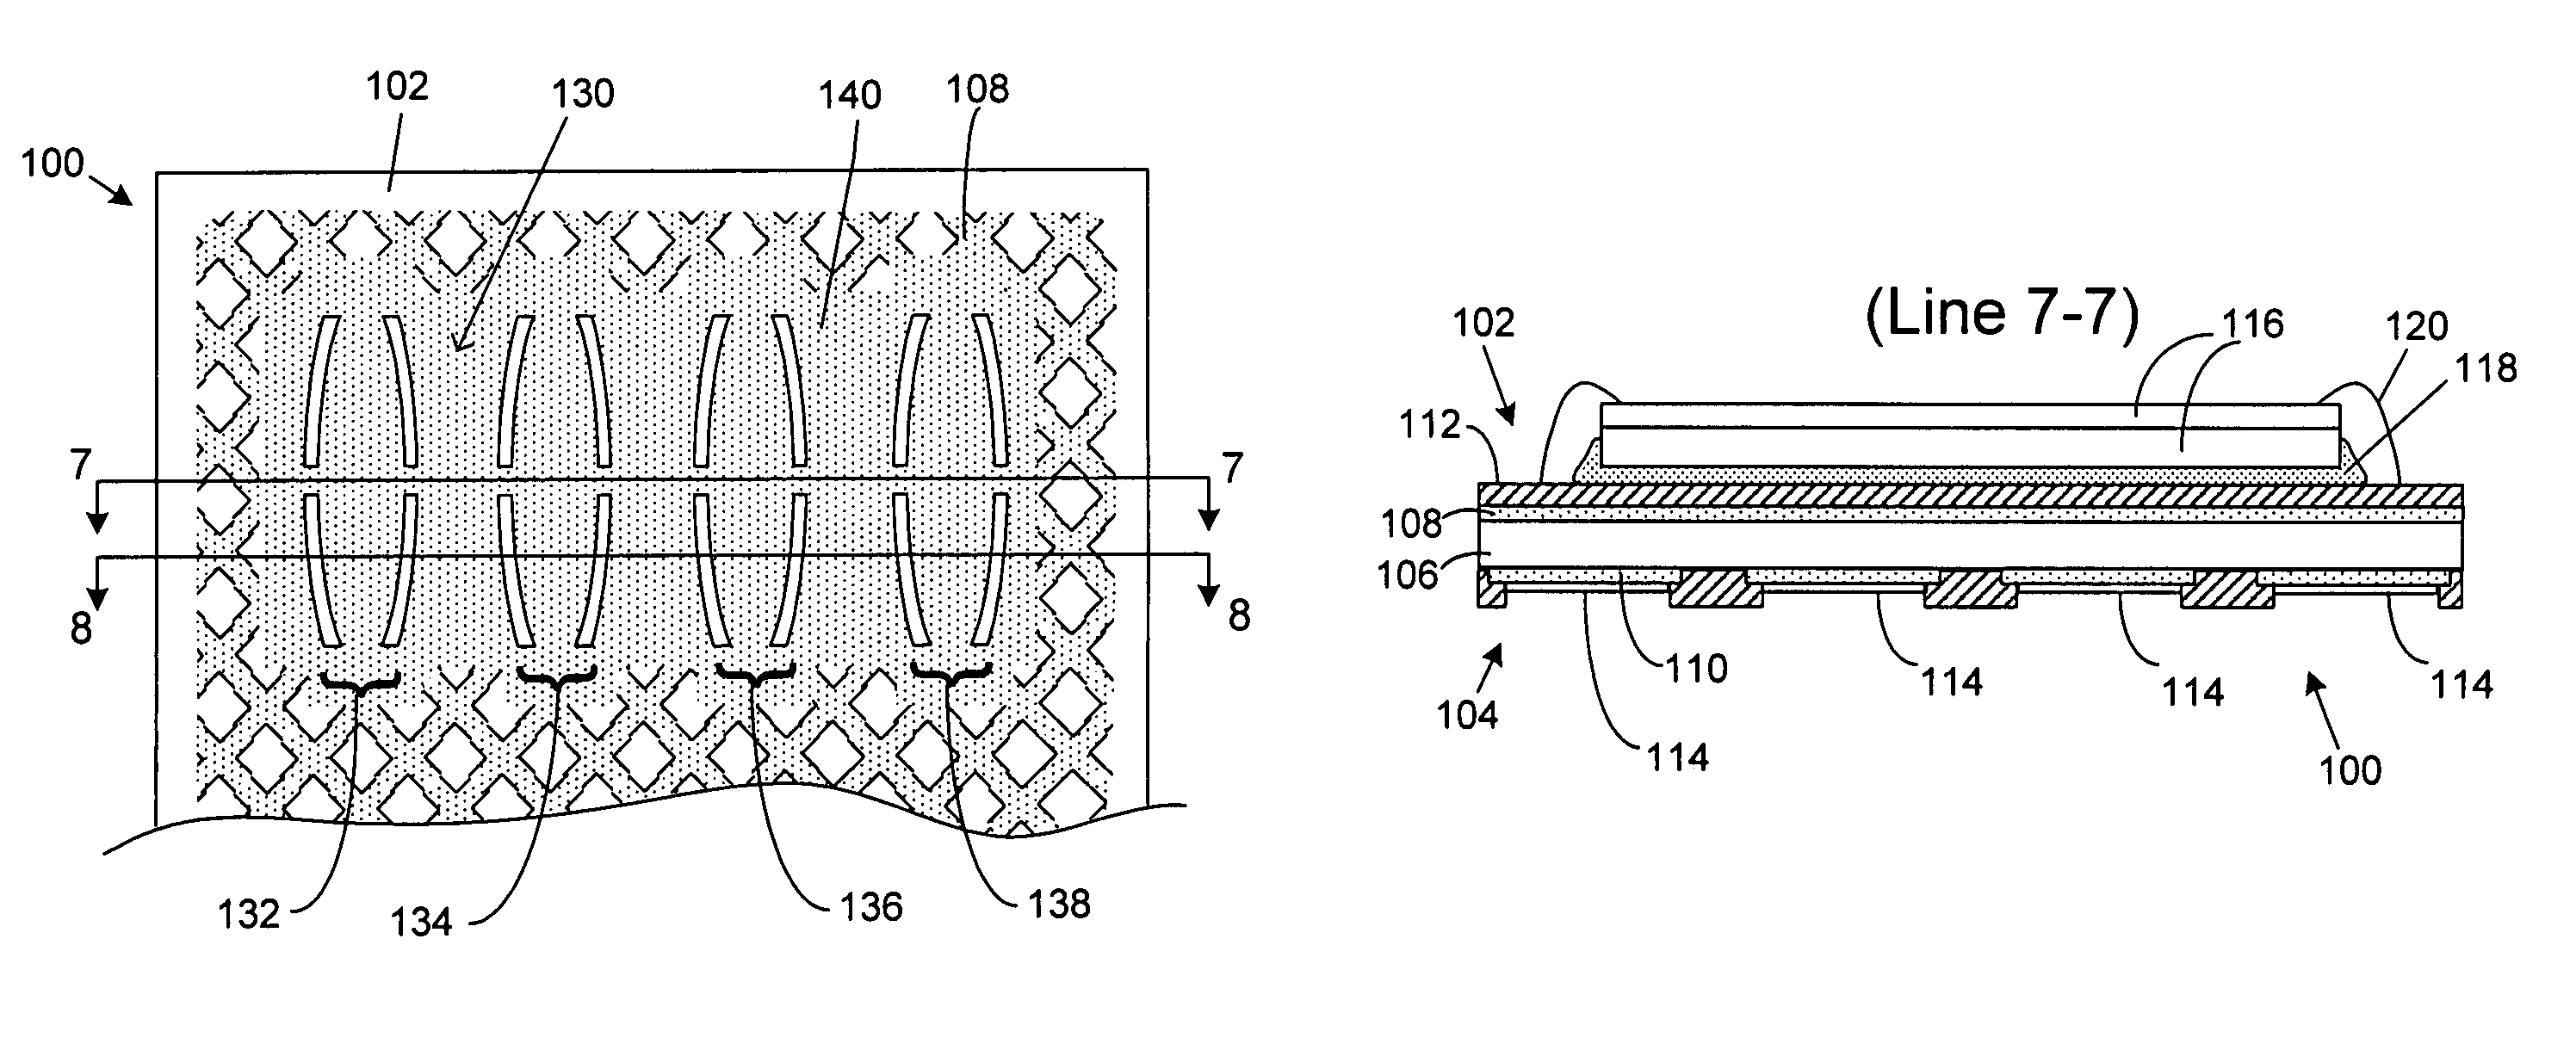 Rigid wave pattern design on chip carrier substrate and printed circuit board for semiconductor and electronic sub-system packaging